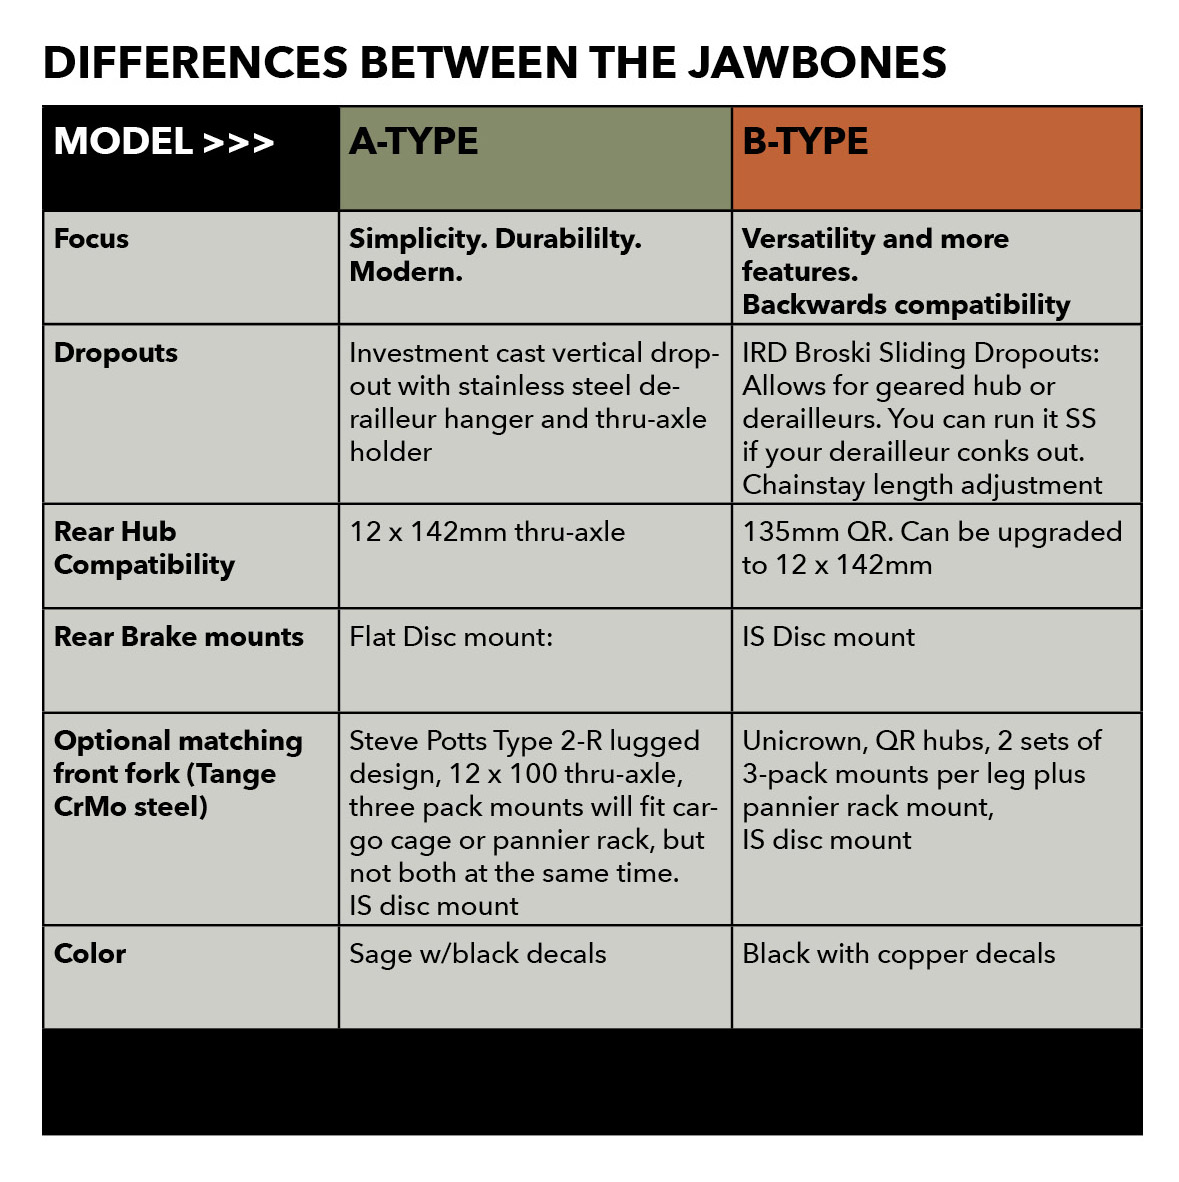 JAWBONE - DIFFERENCES